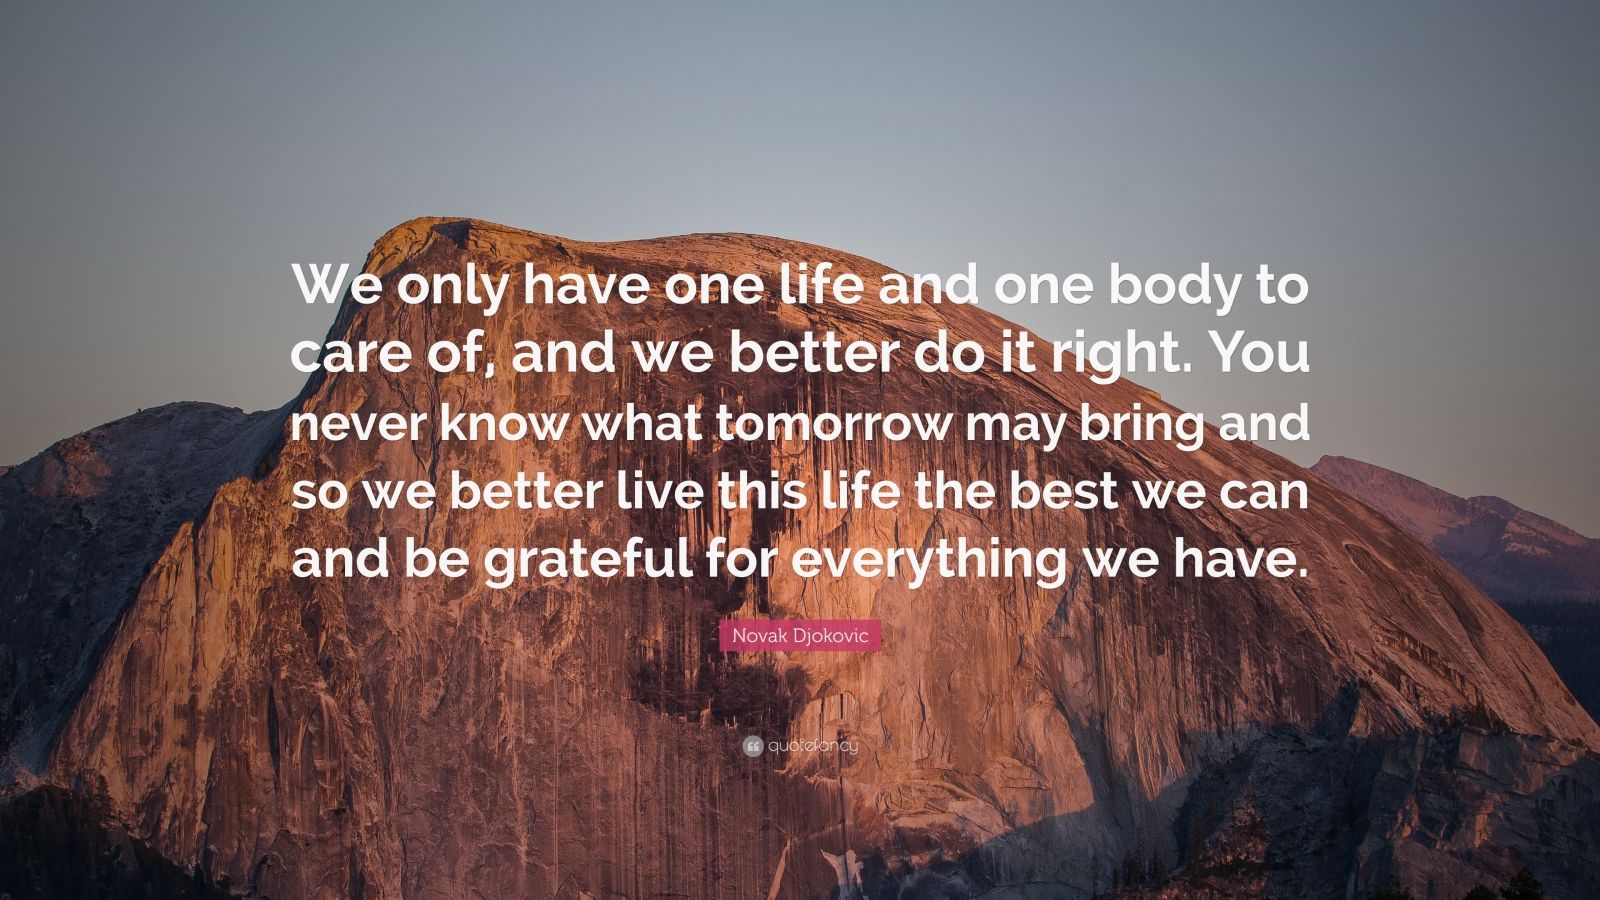 Novak Djokovic Quote: "We only have one life and one body ...